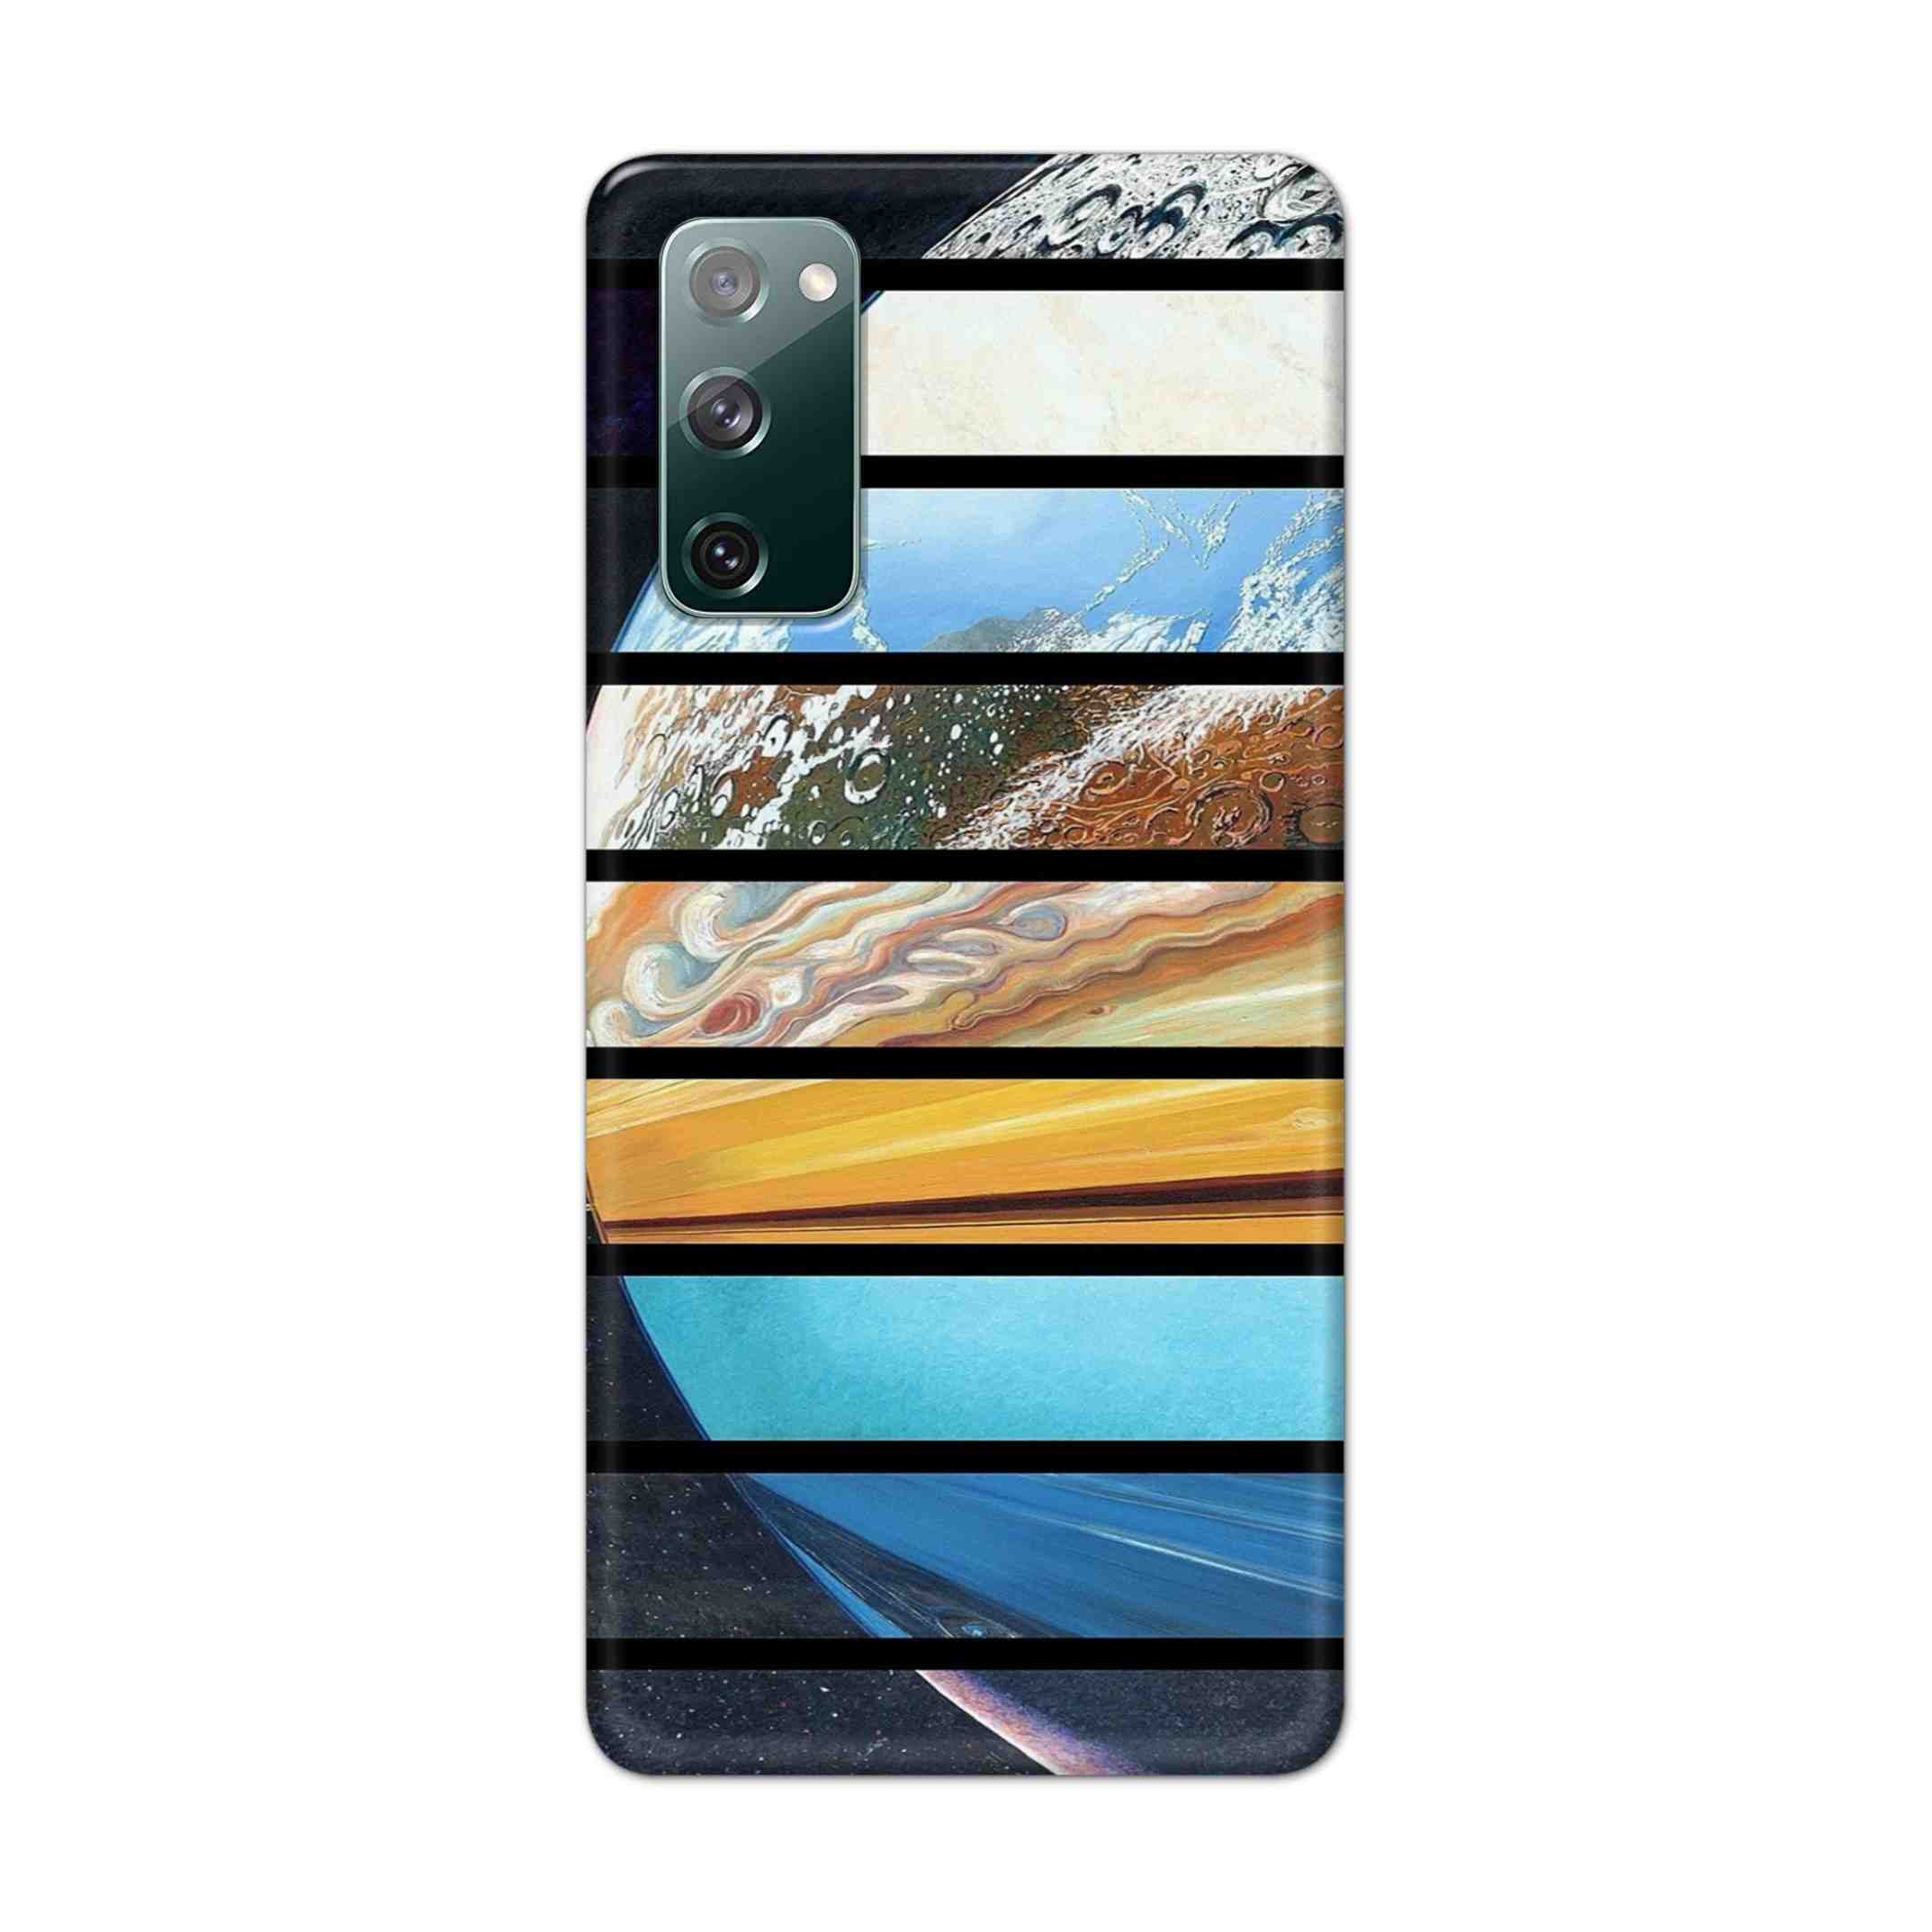 Buy Colourful Earth Hard Back Mobile Phone Case Cover For Samsung Galaxy S20 FE Online